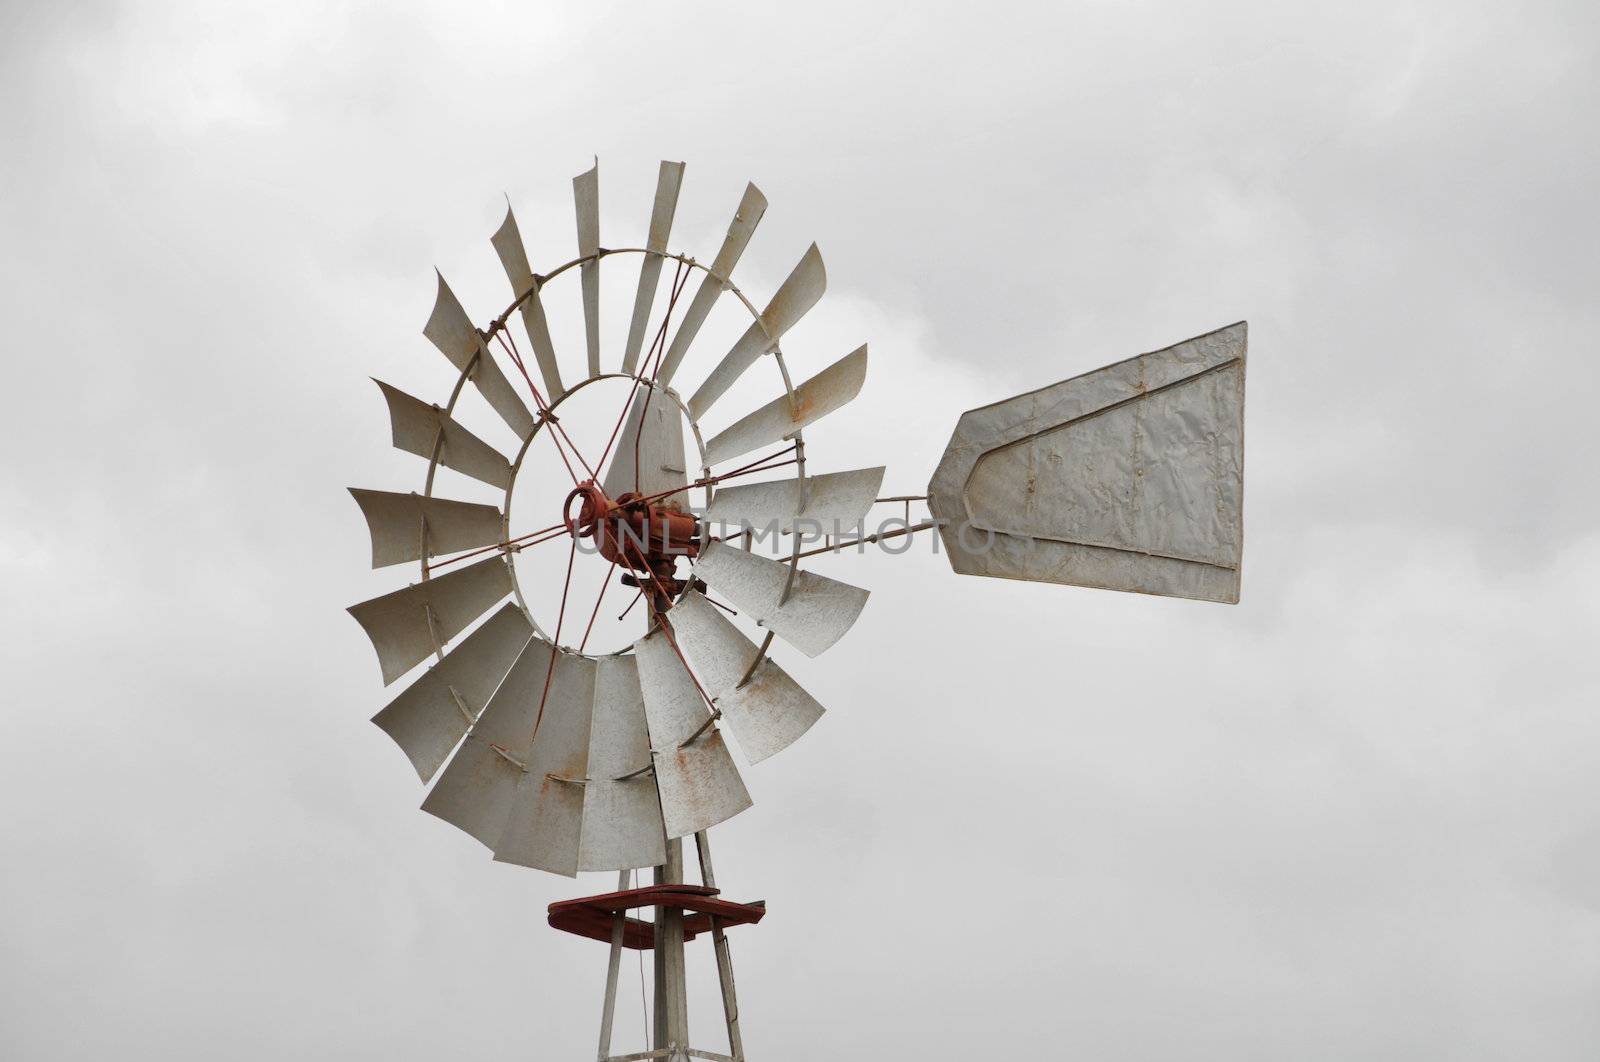 Metal windmill on a cloudy sky, in Canary Islands, Spain